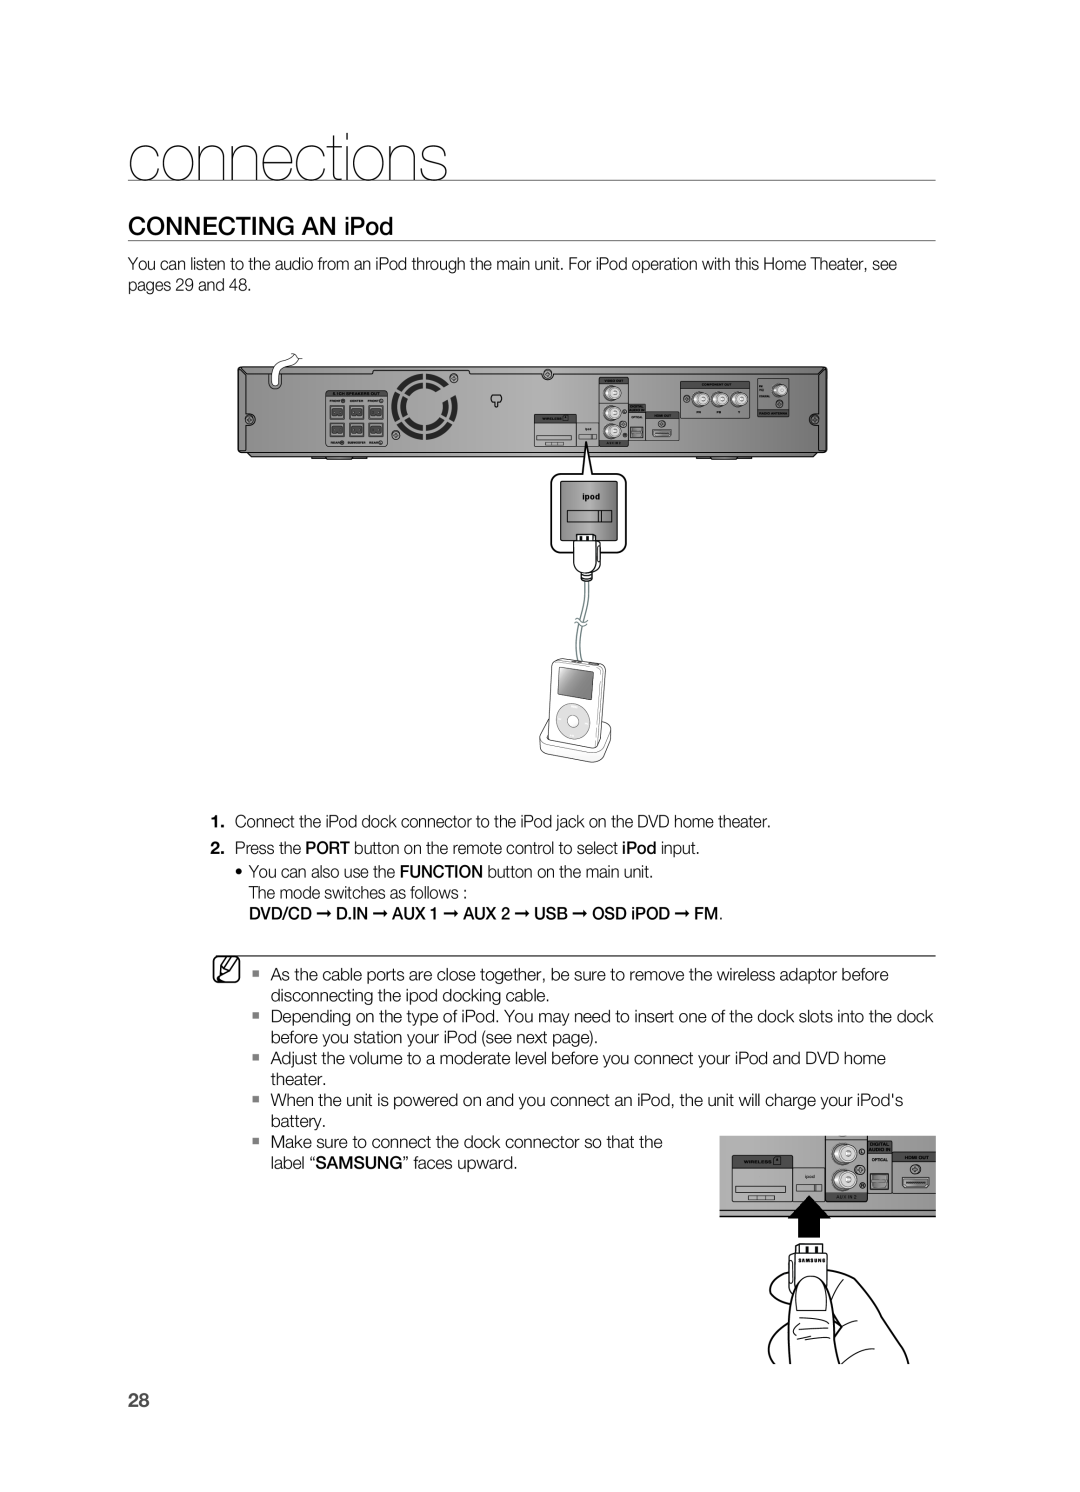 Samsung HT-TWZ315 manual Connecting an iPod, connections 